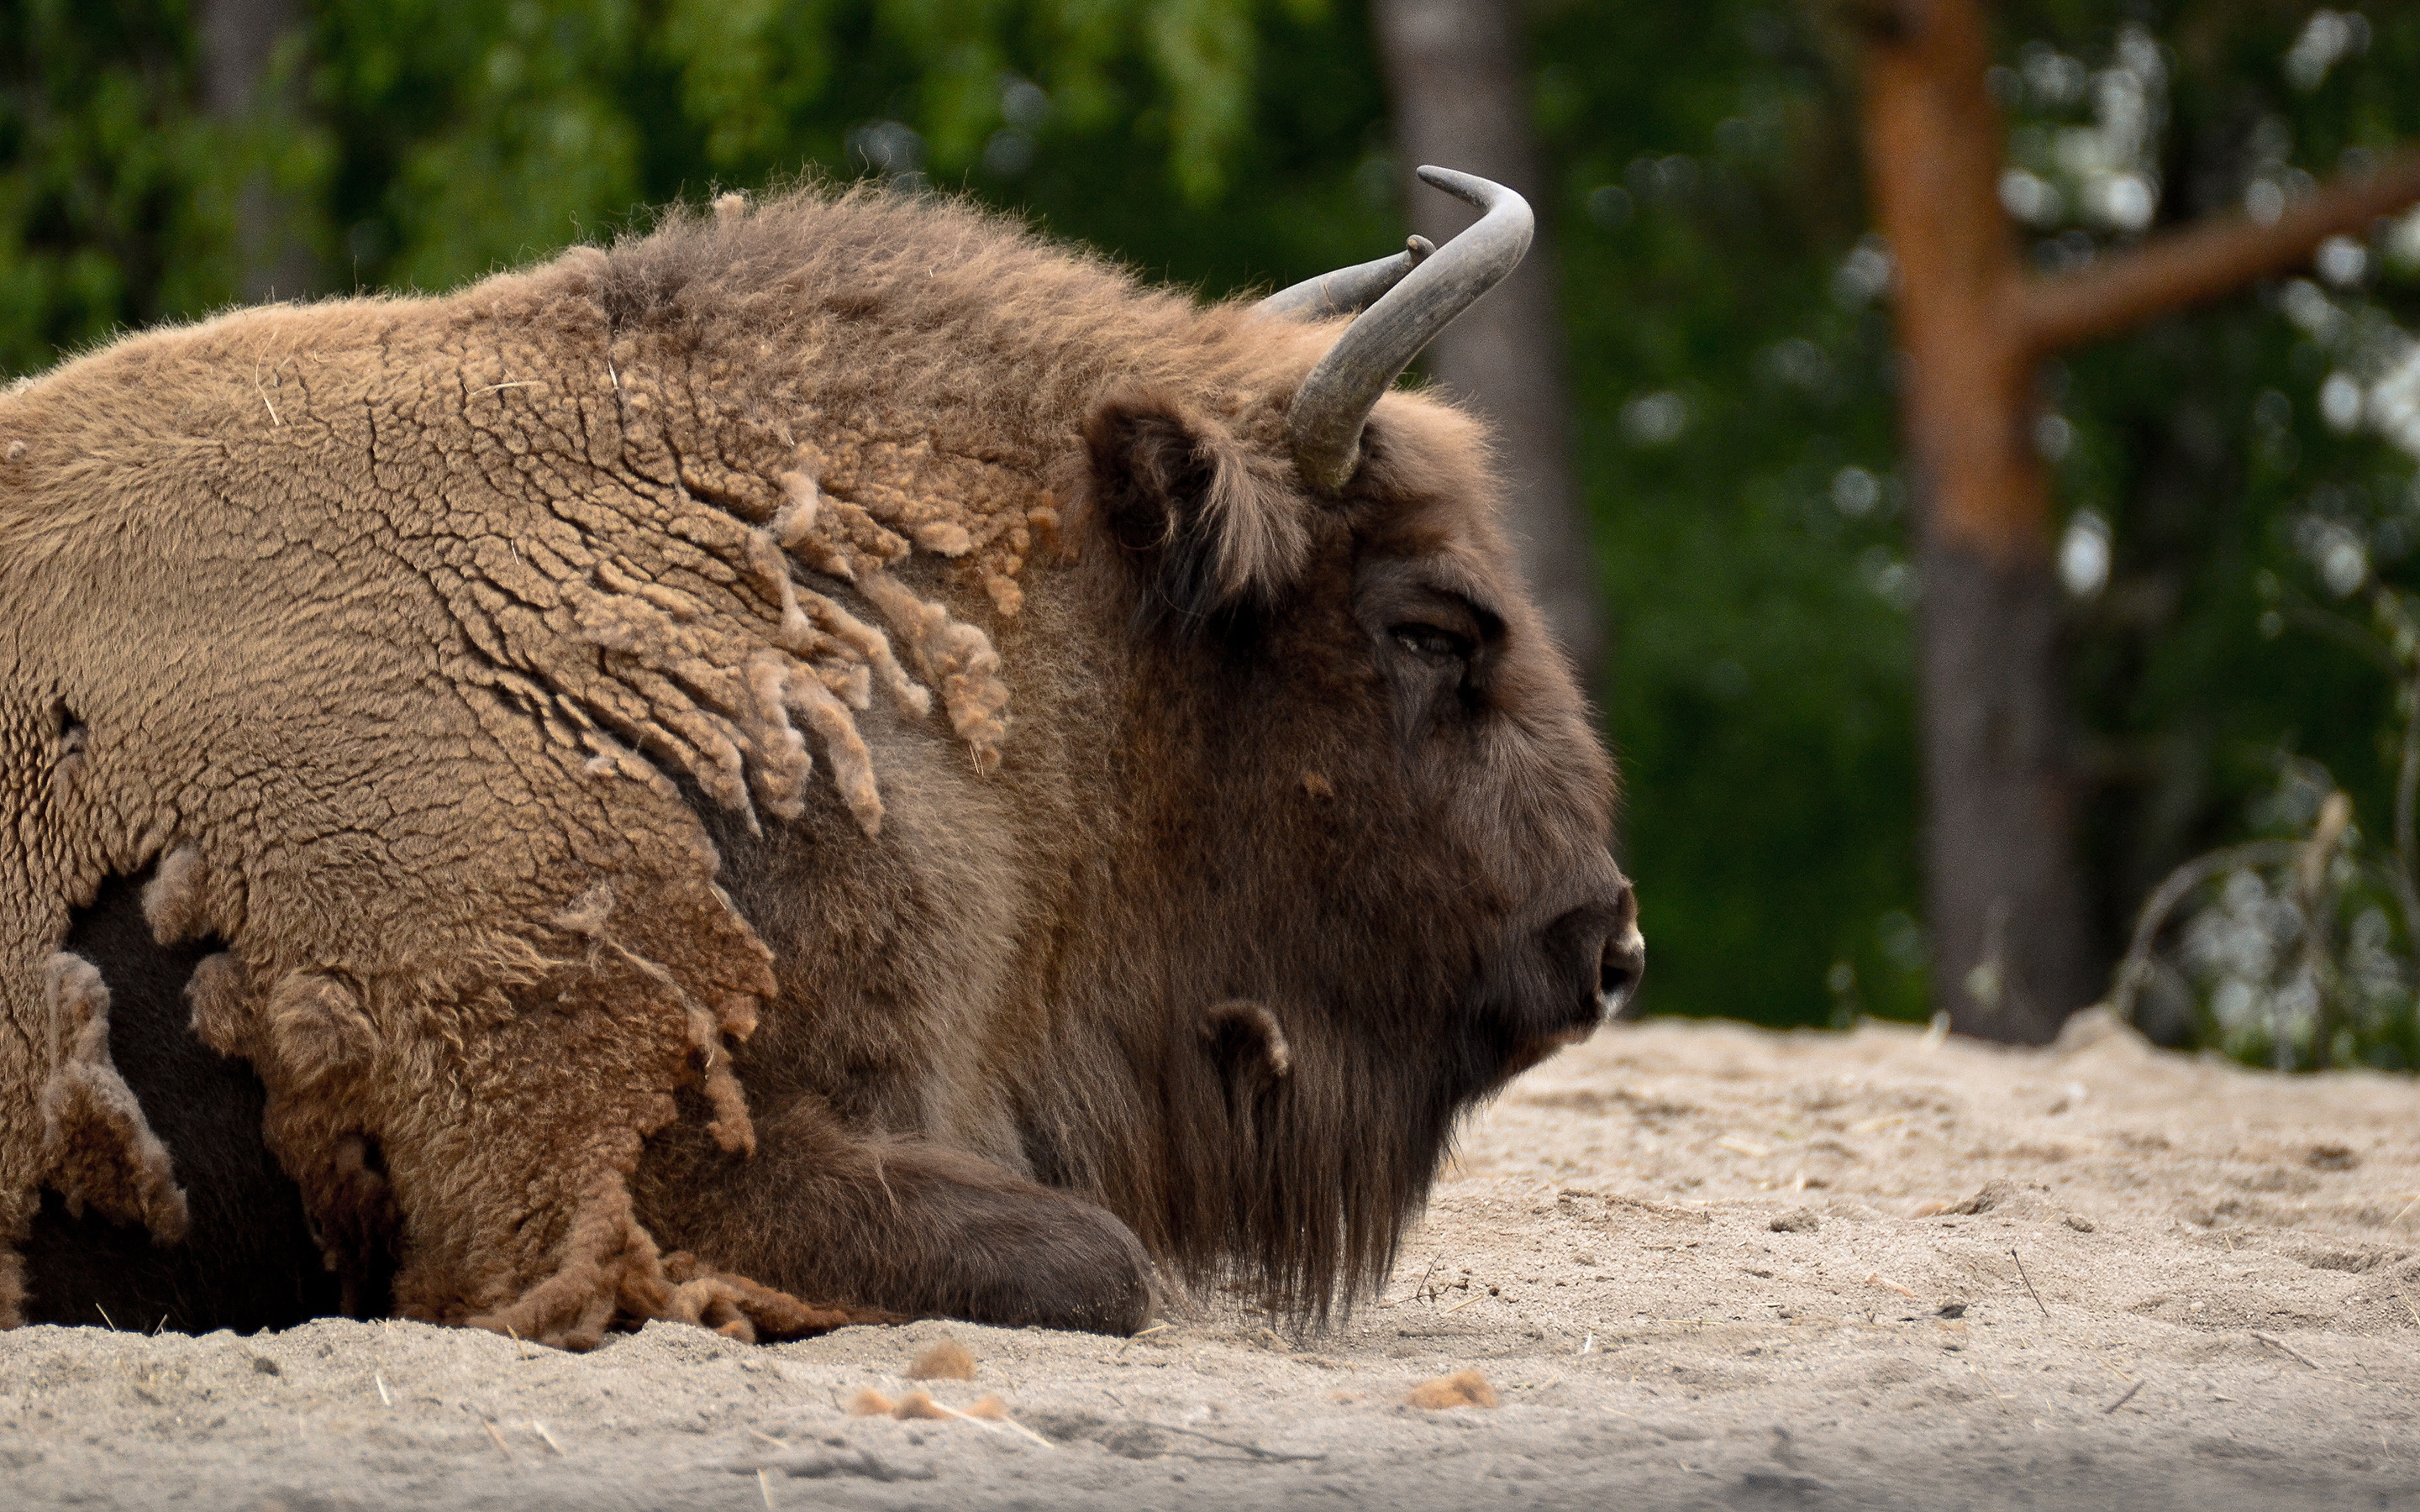 Wisent for 2880 x 1800 Retina Display resolution